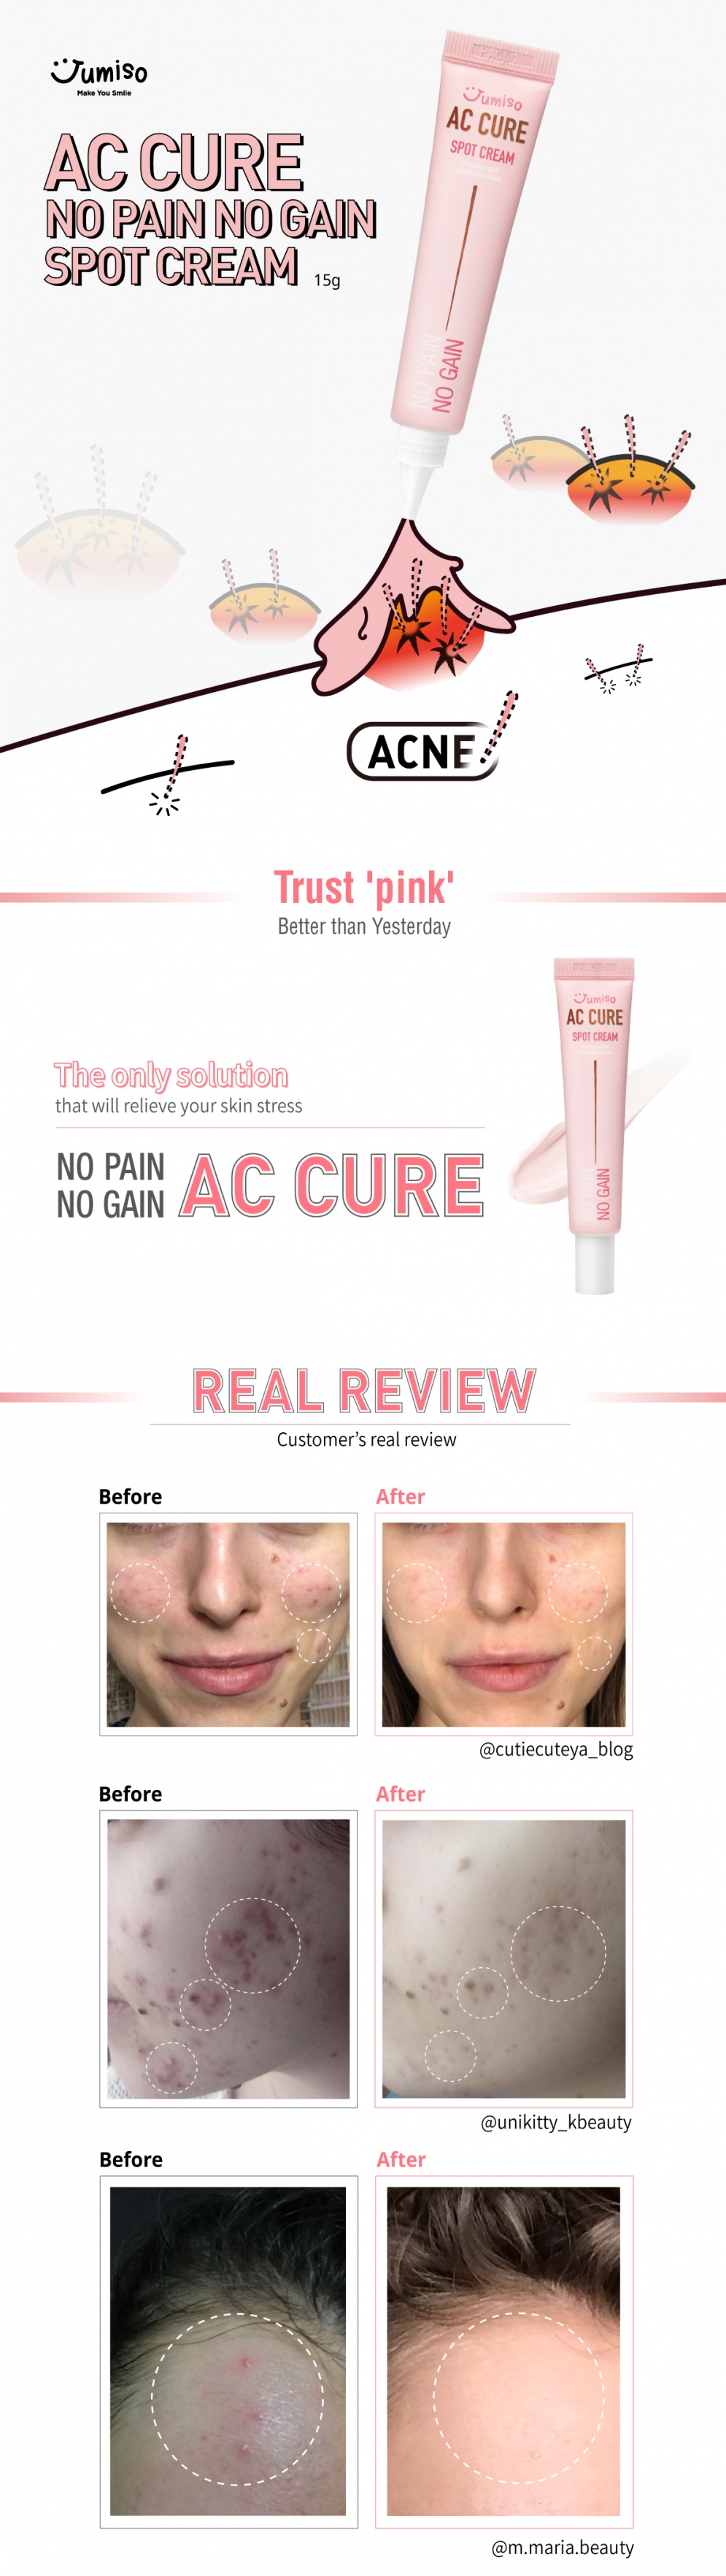 Image result for Jumiso AC Cure Spot Cream